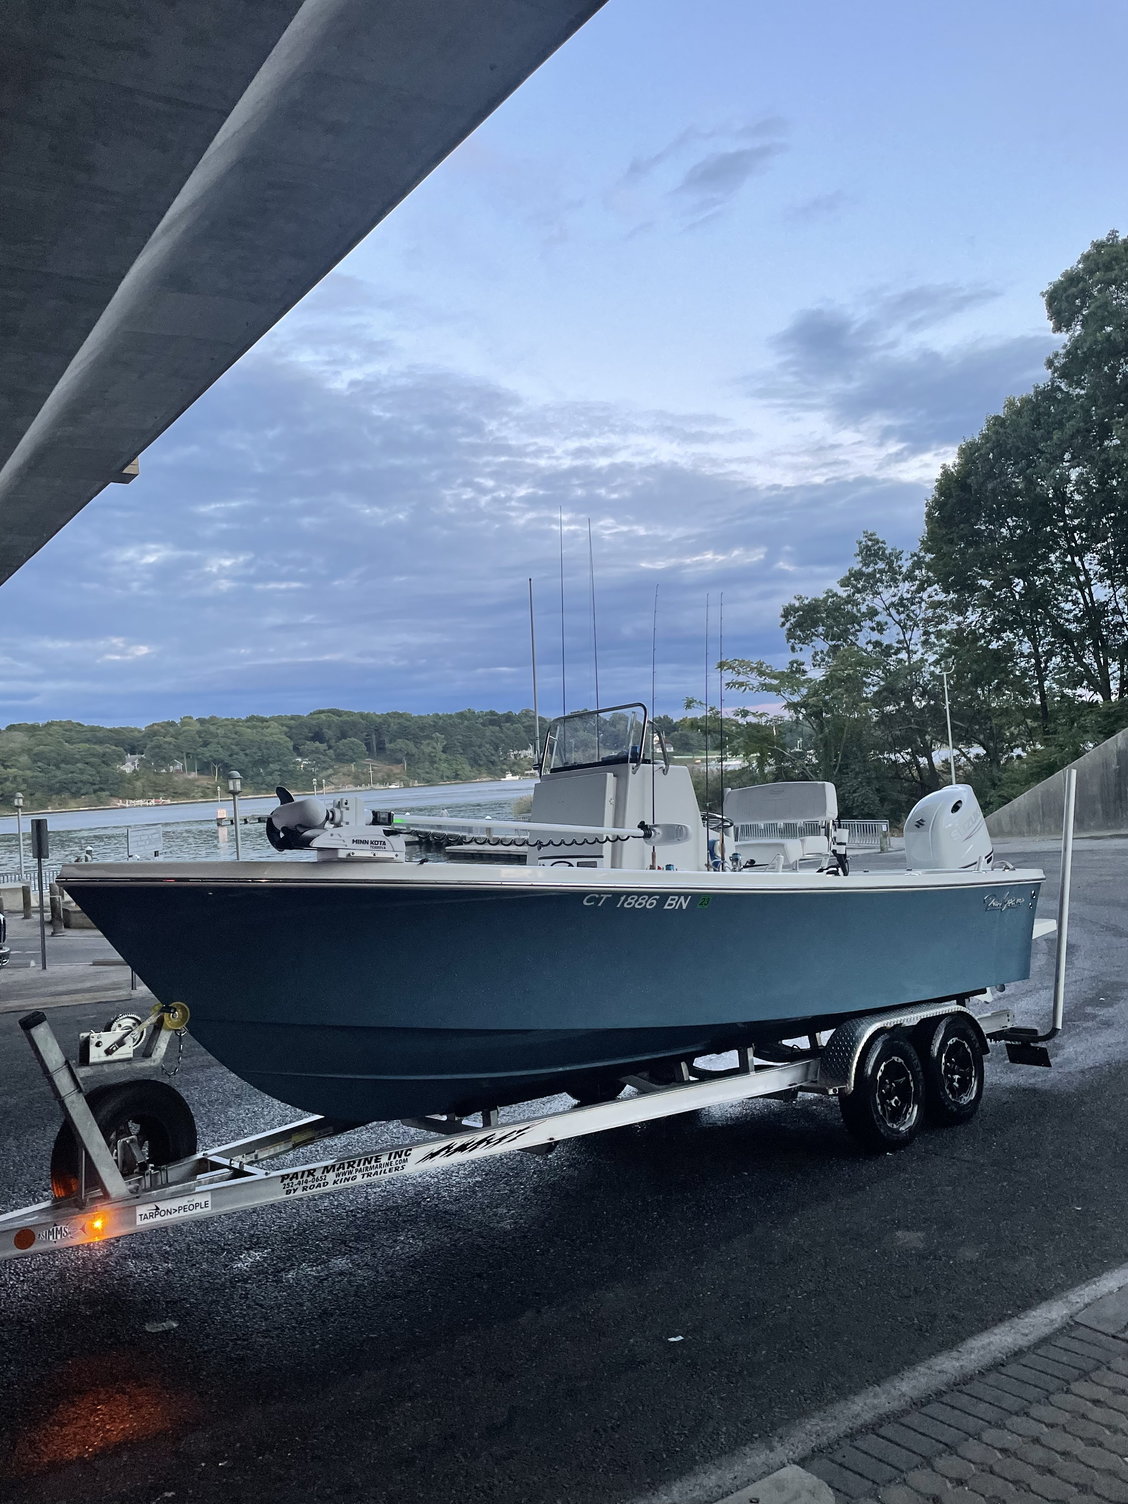 2021 Pair Customs CC For Sale or Trade - The Hull Truth - Boating and Fishing  Forum